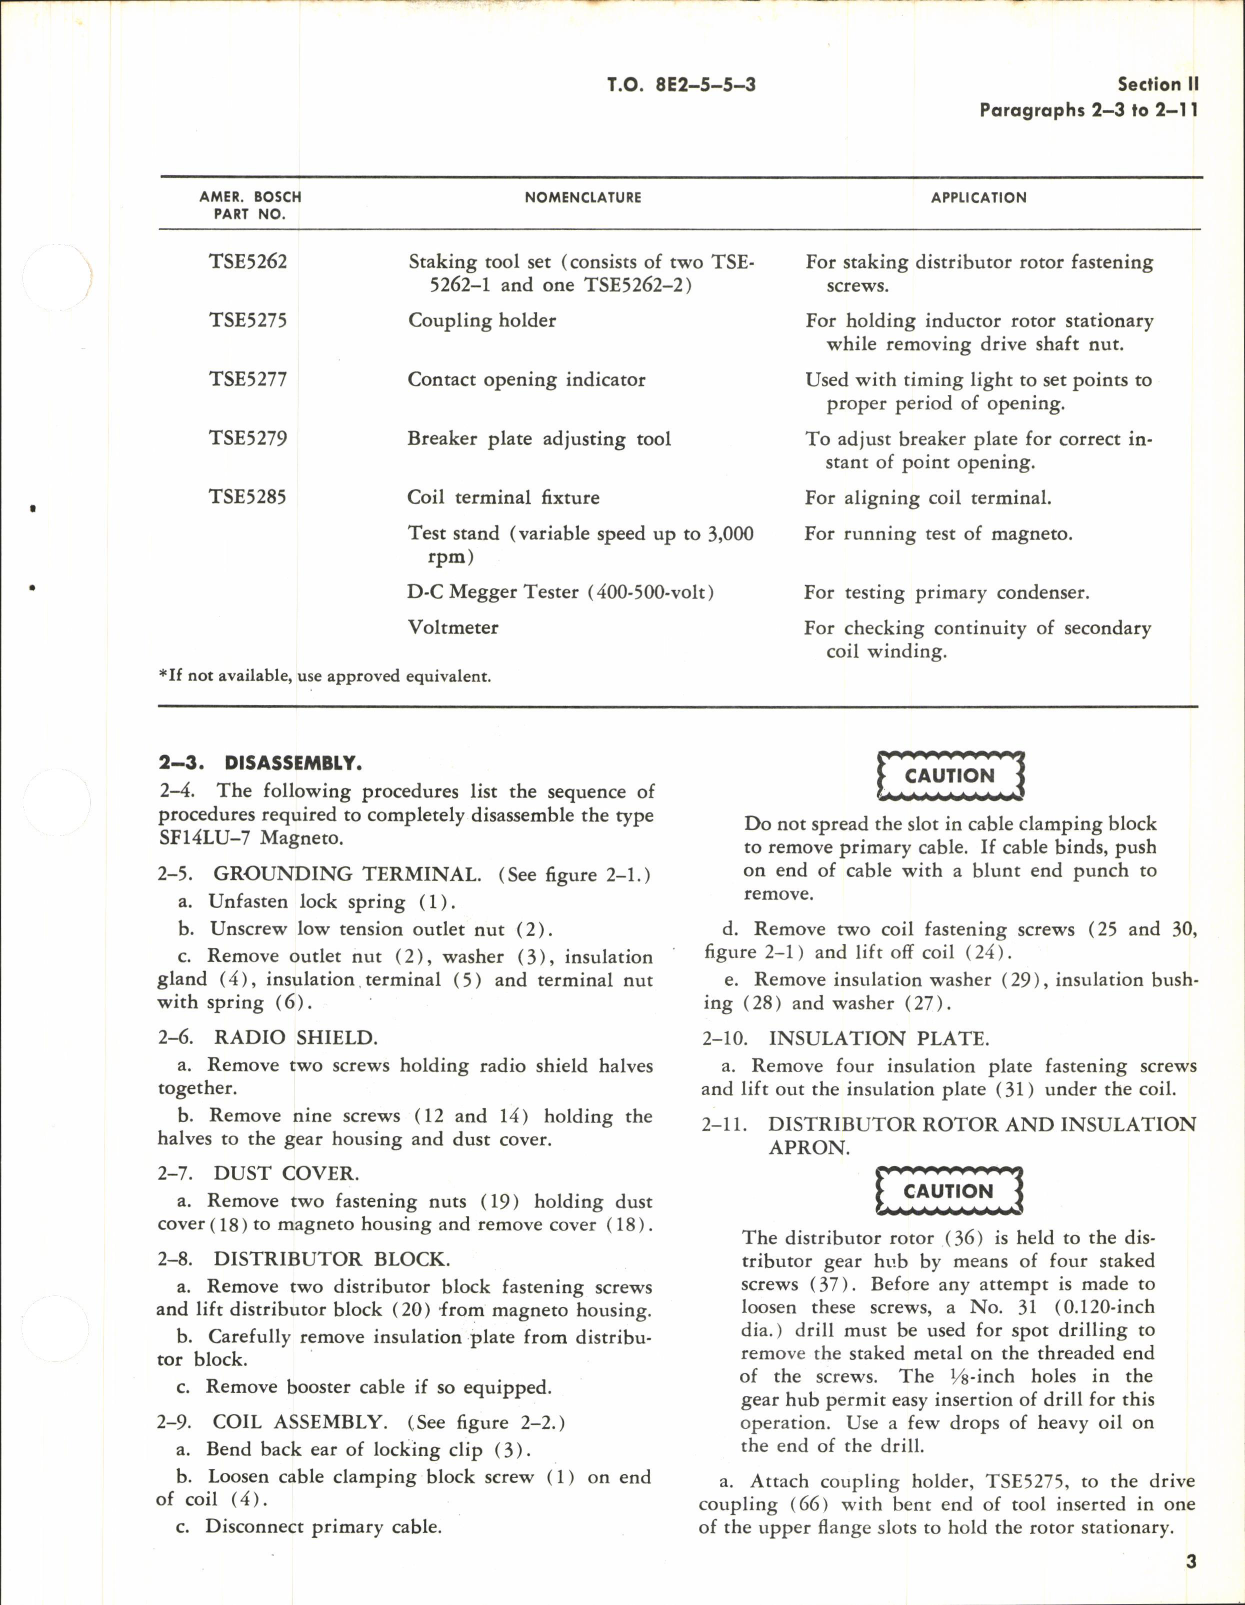 Sample page 7 from AirCorps Library document: Overhaul Instructions for Aircraft Magneto Type SF14LU-7